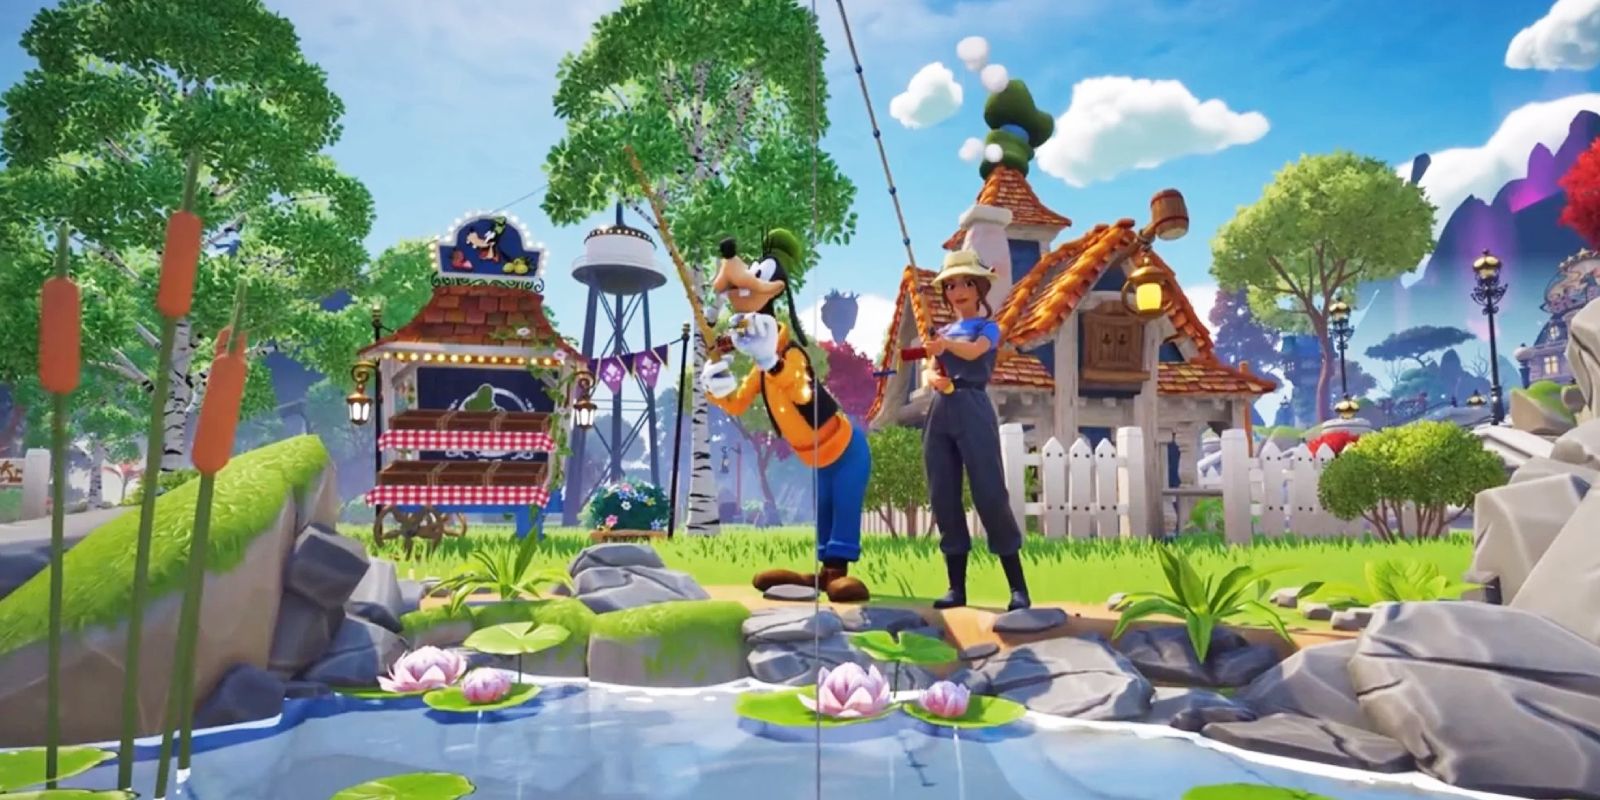 Goofy and custom character fishing in pond in the peaceful meadow, disney dreamlight valley 